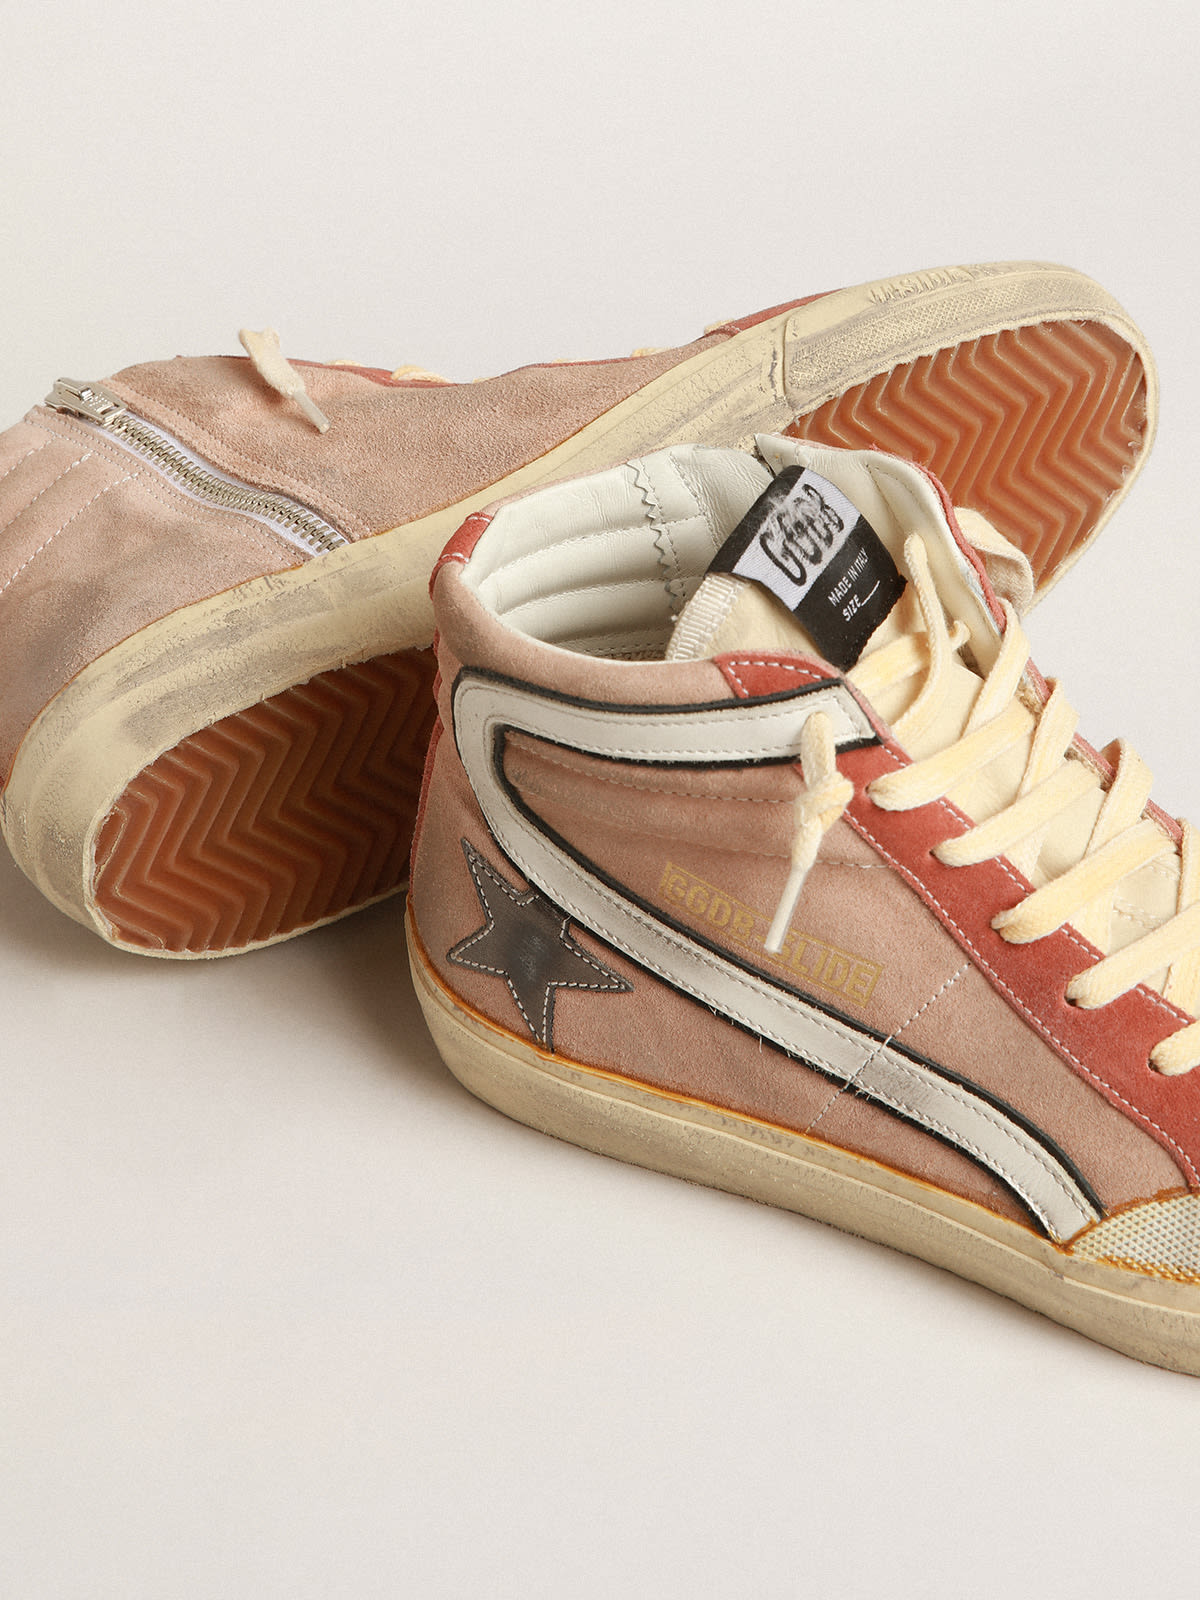 Golden Goose - Slide in pink suede with anthracite laminated leather star in 